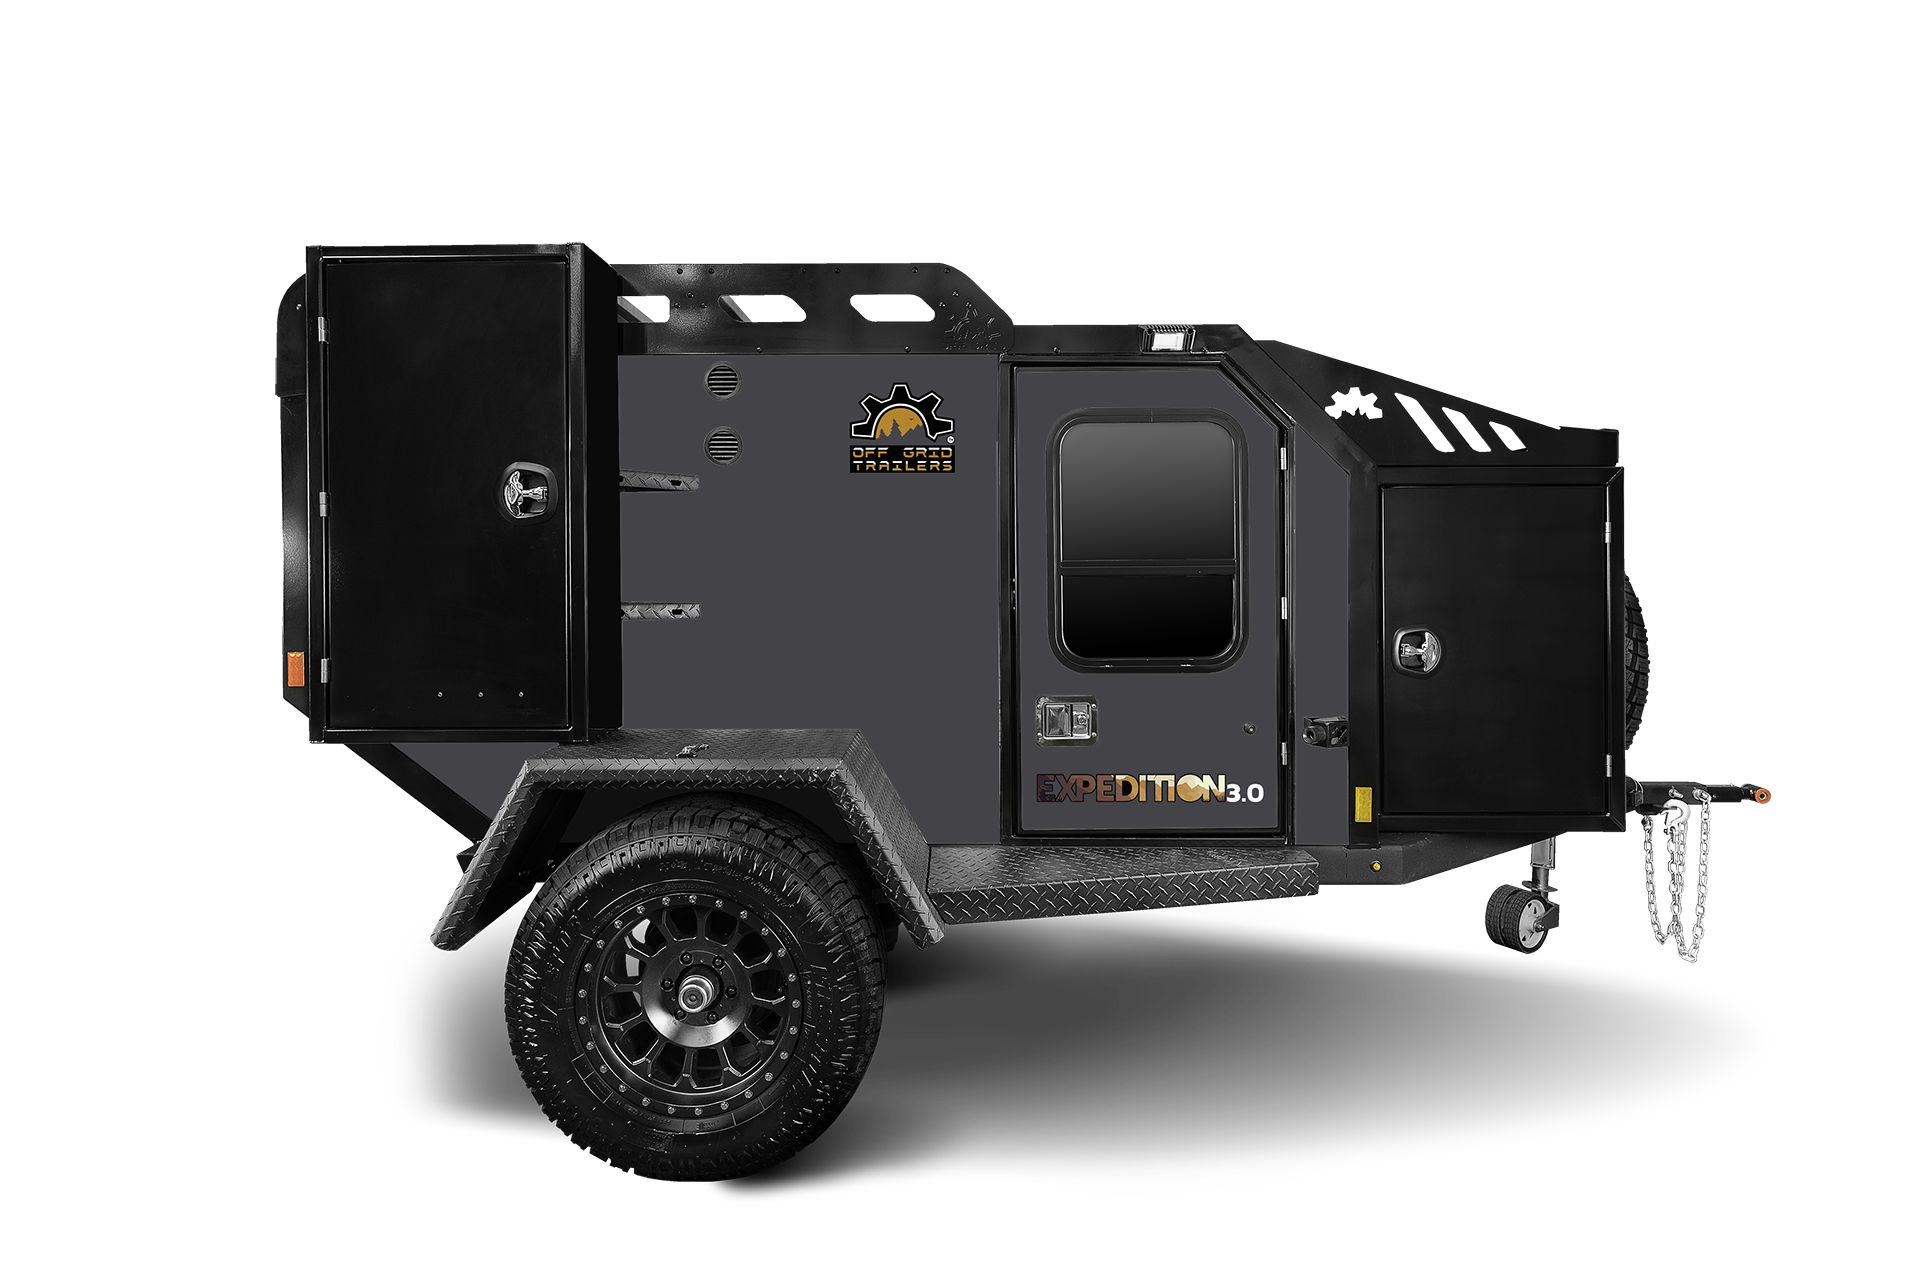 2024 EXPEDITION 3.0 OVERLAND TRAILER (#3077)